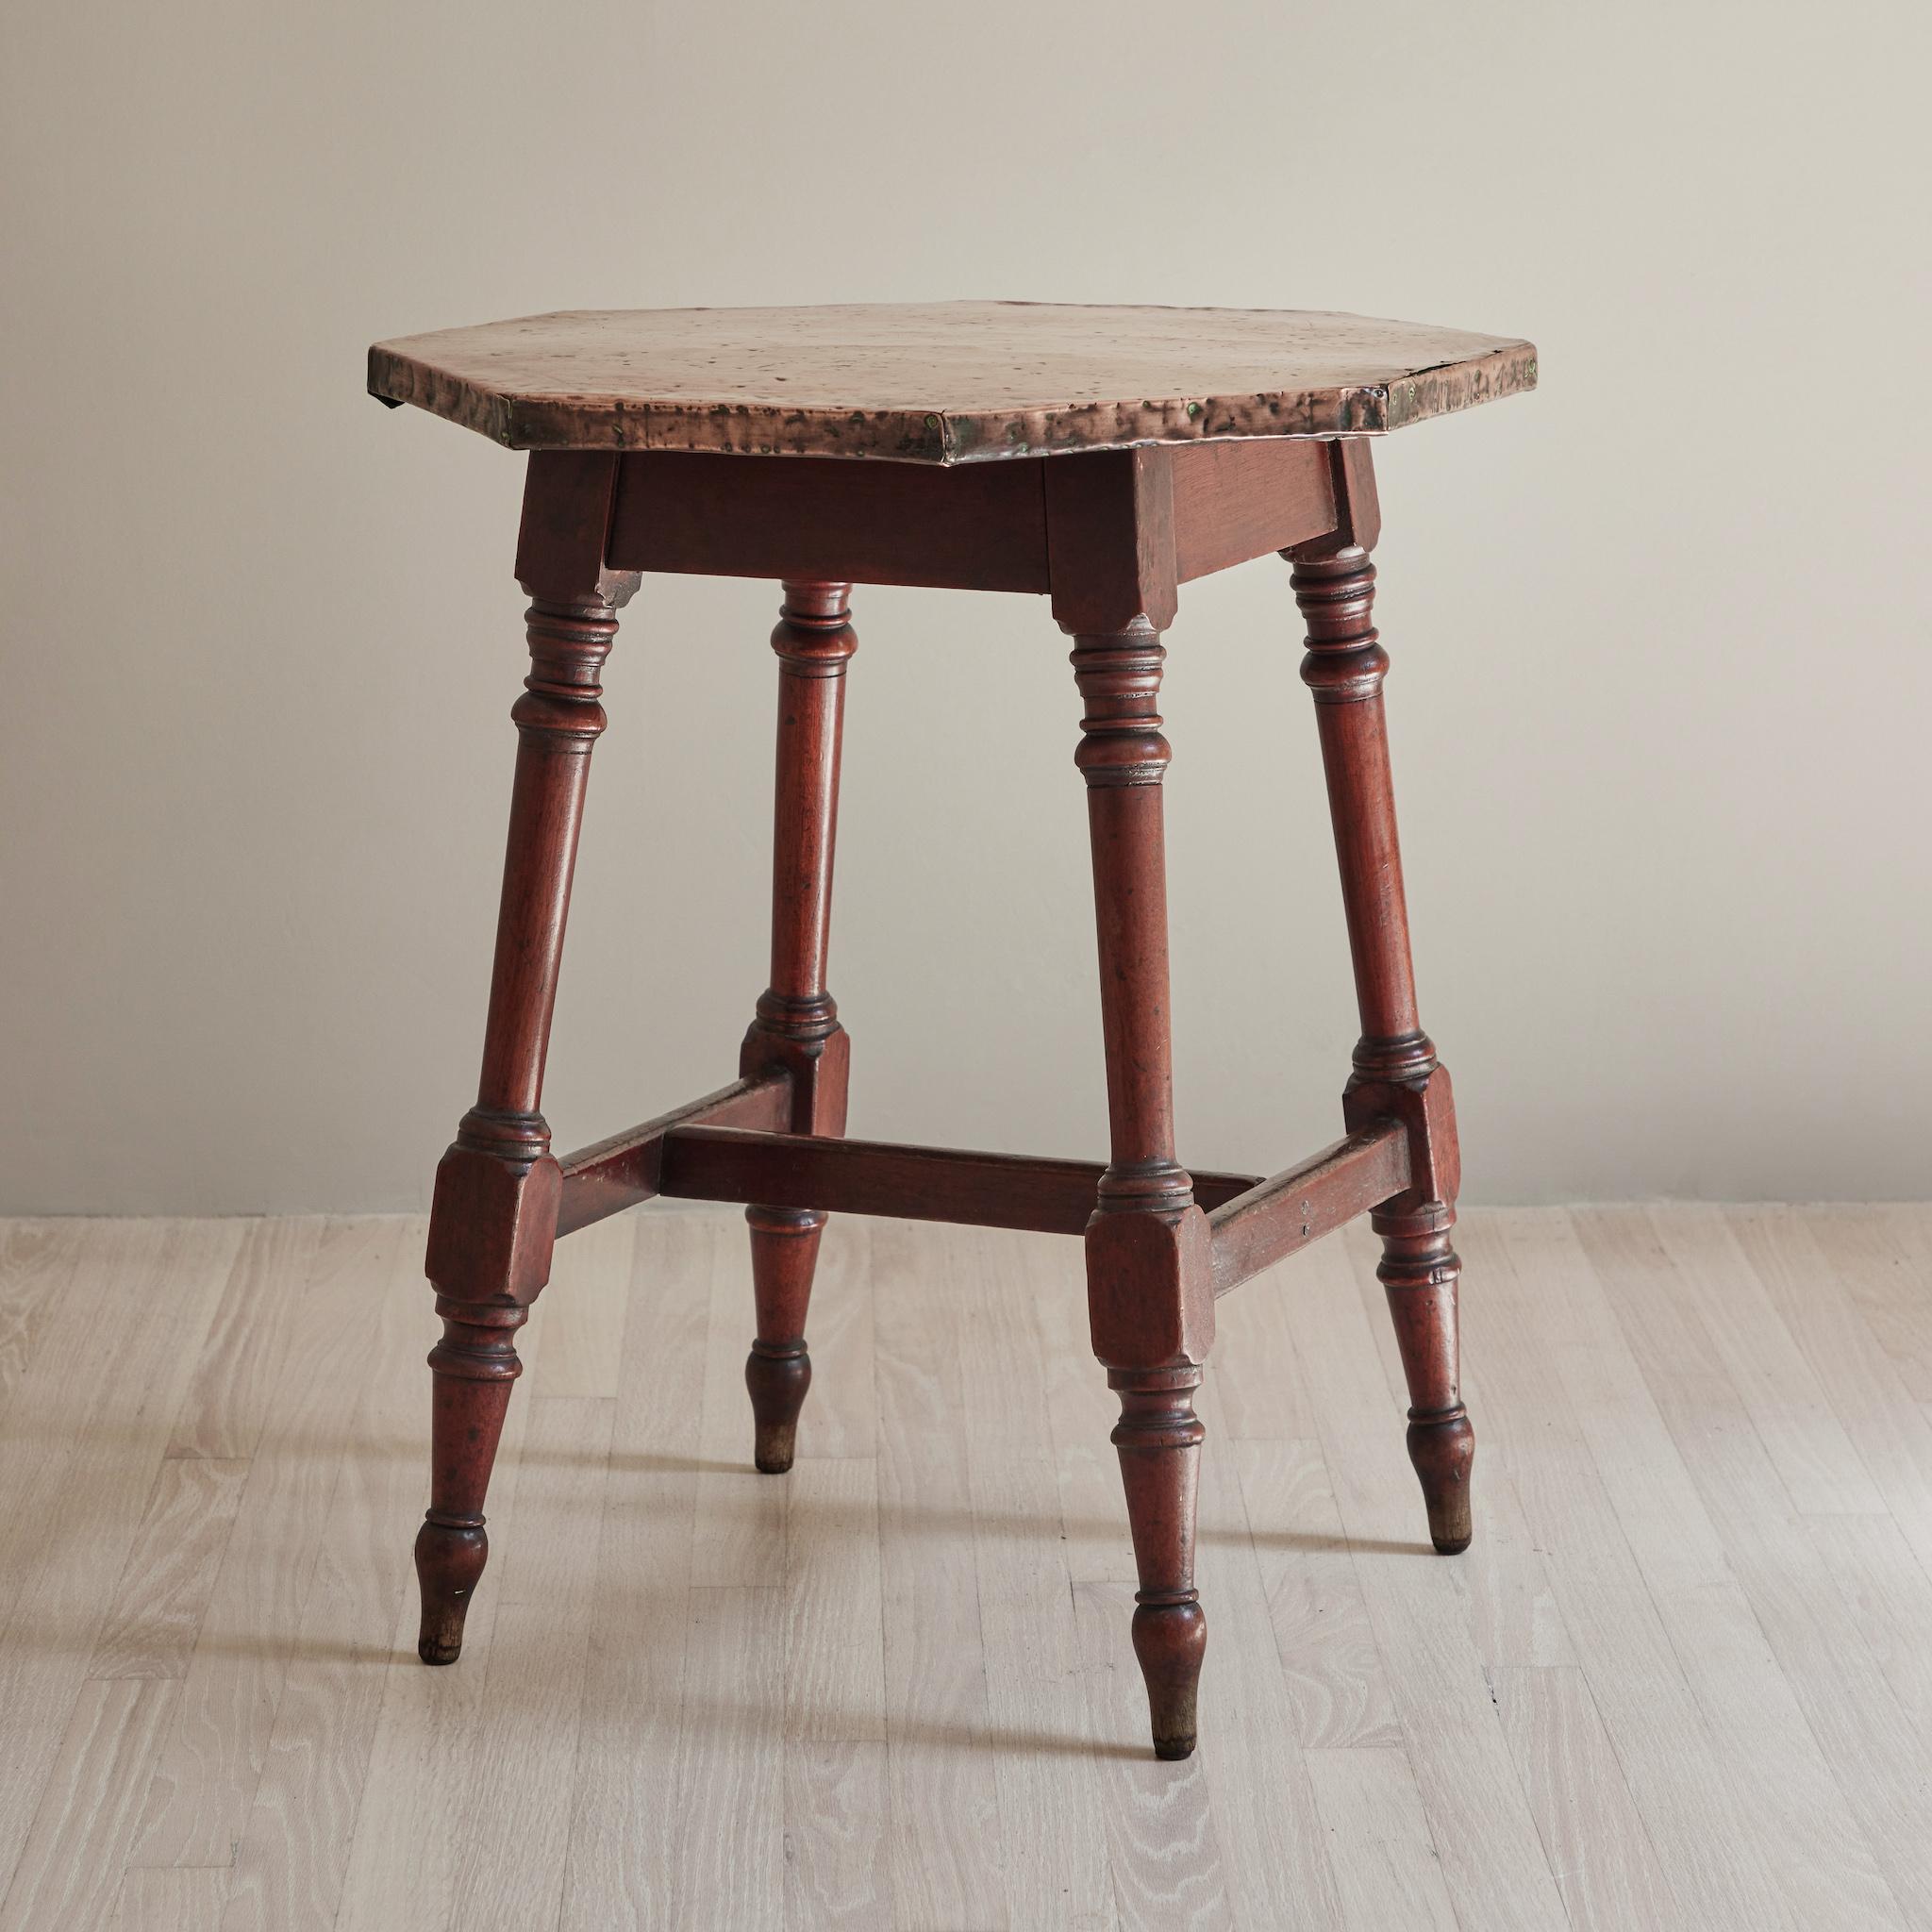 Late 19th century copper top side table with wooden legs from England. 